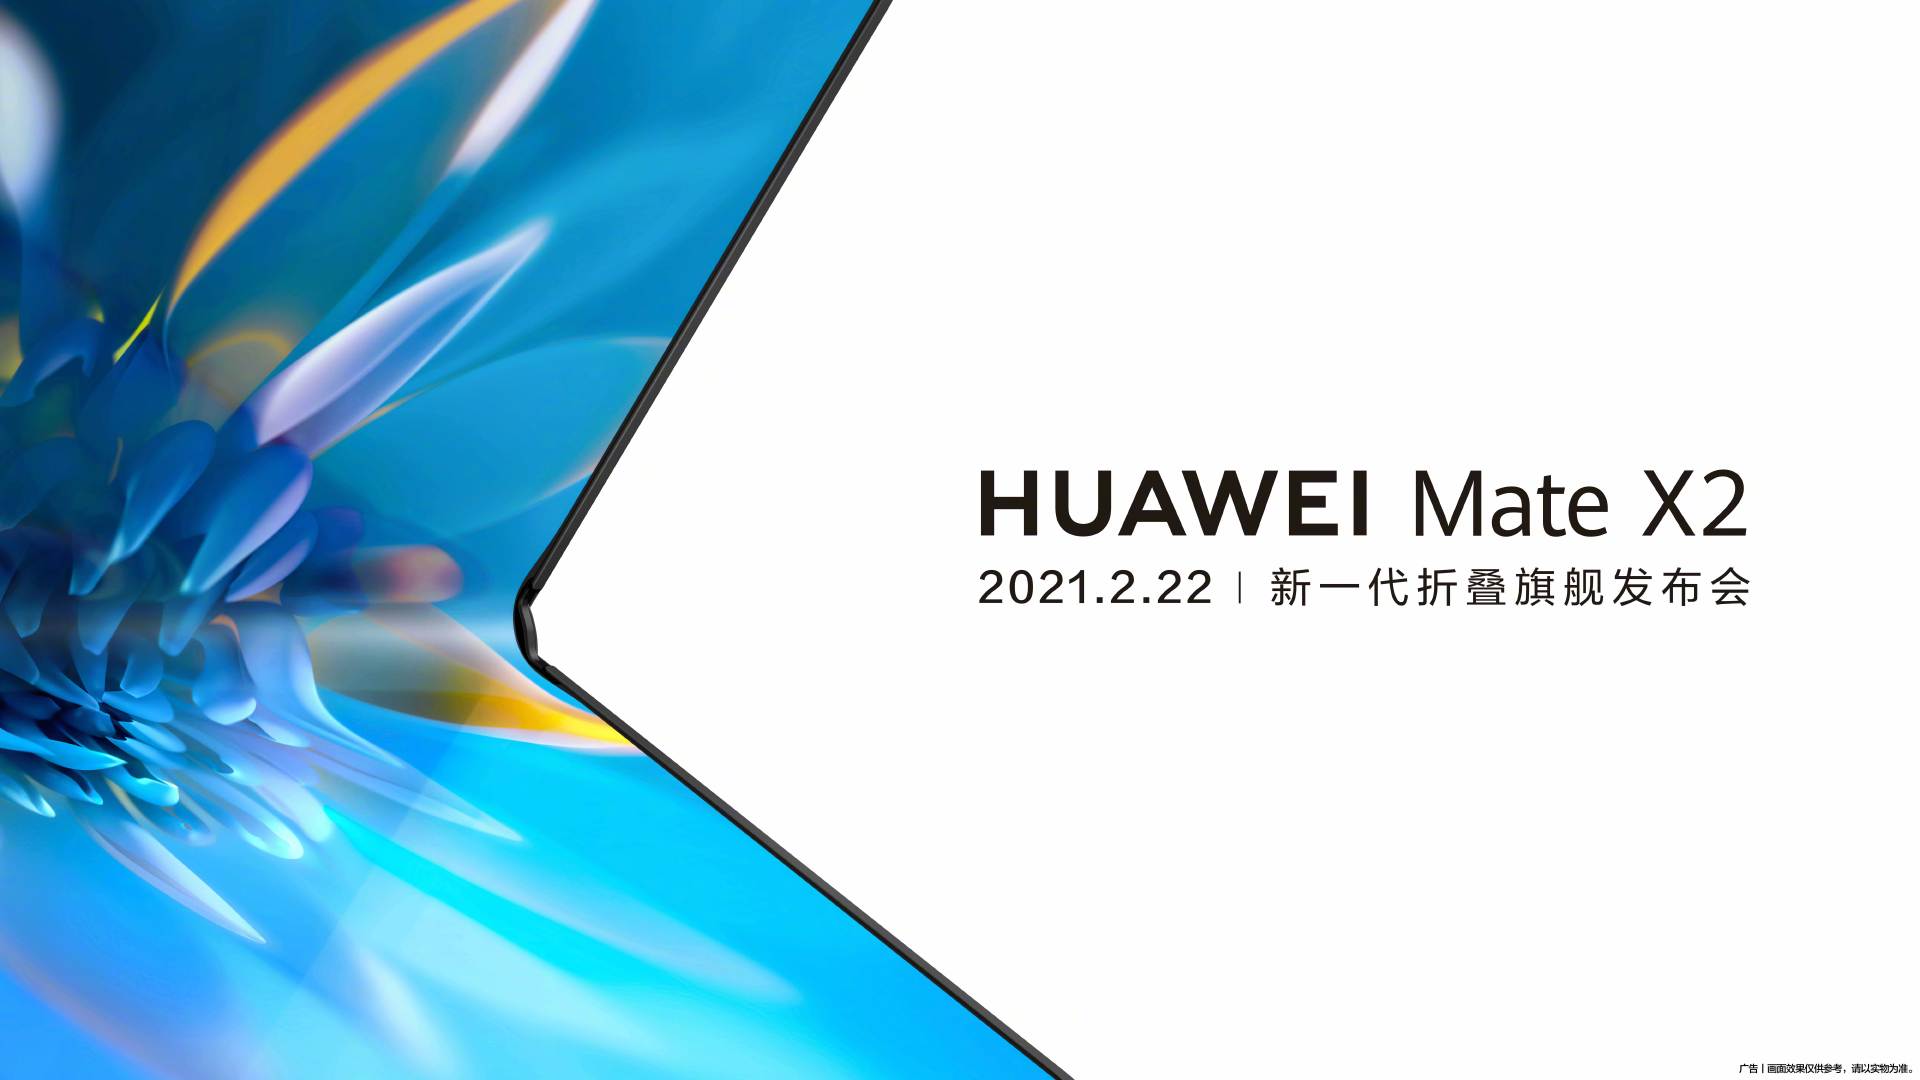 Huawei's 2021 smartphone production is estimated at 60% less compared to  2020 as rumors of a delayed P50 launch emerge -  News